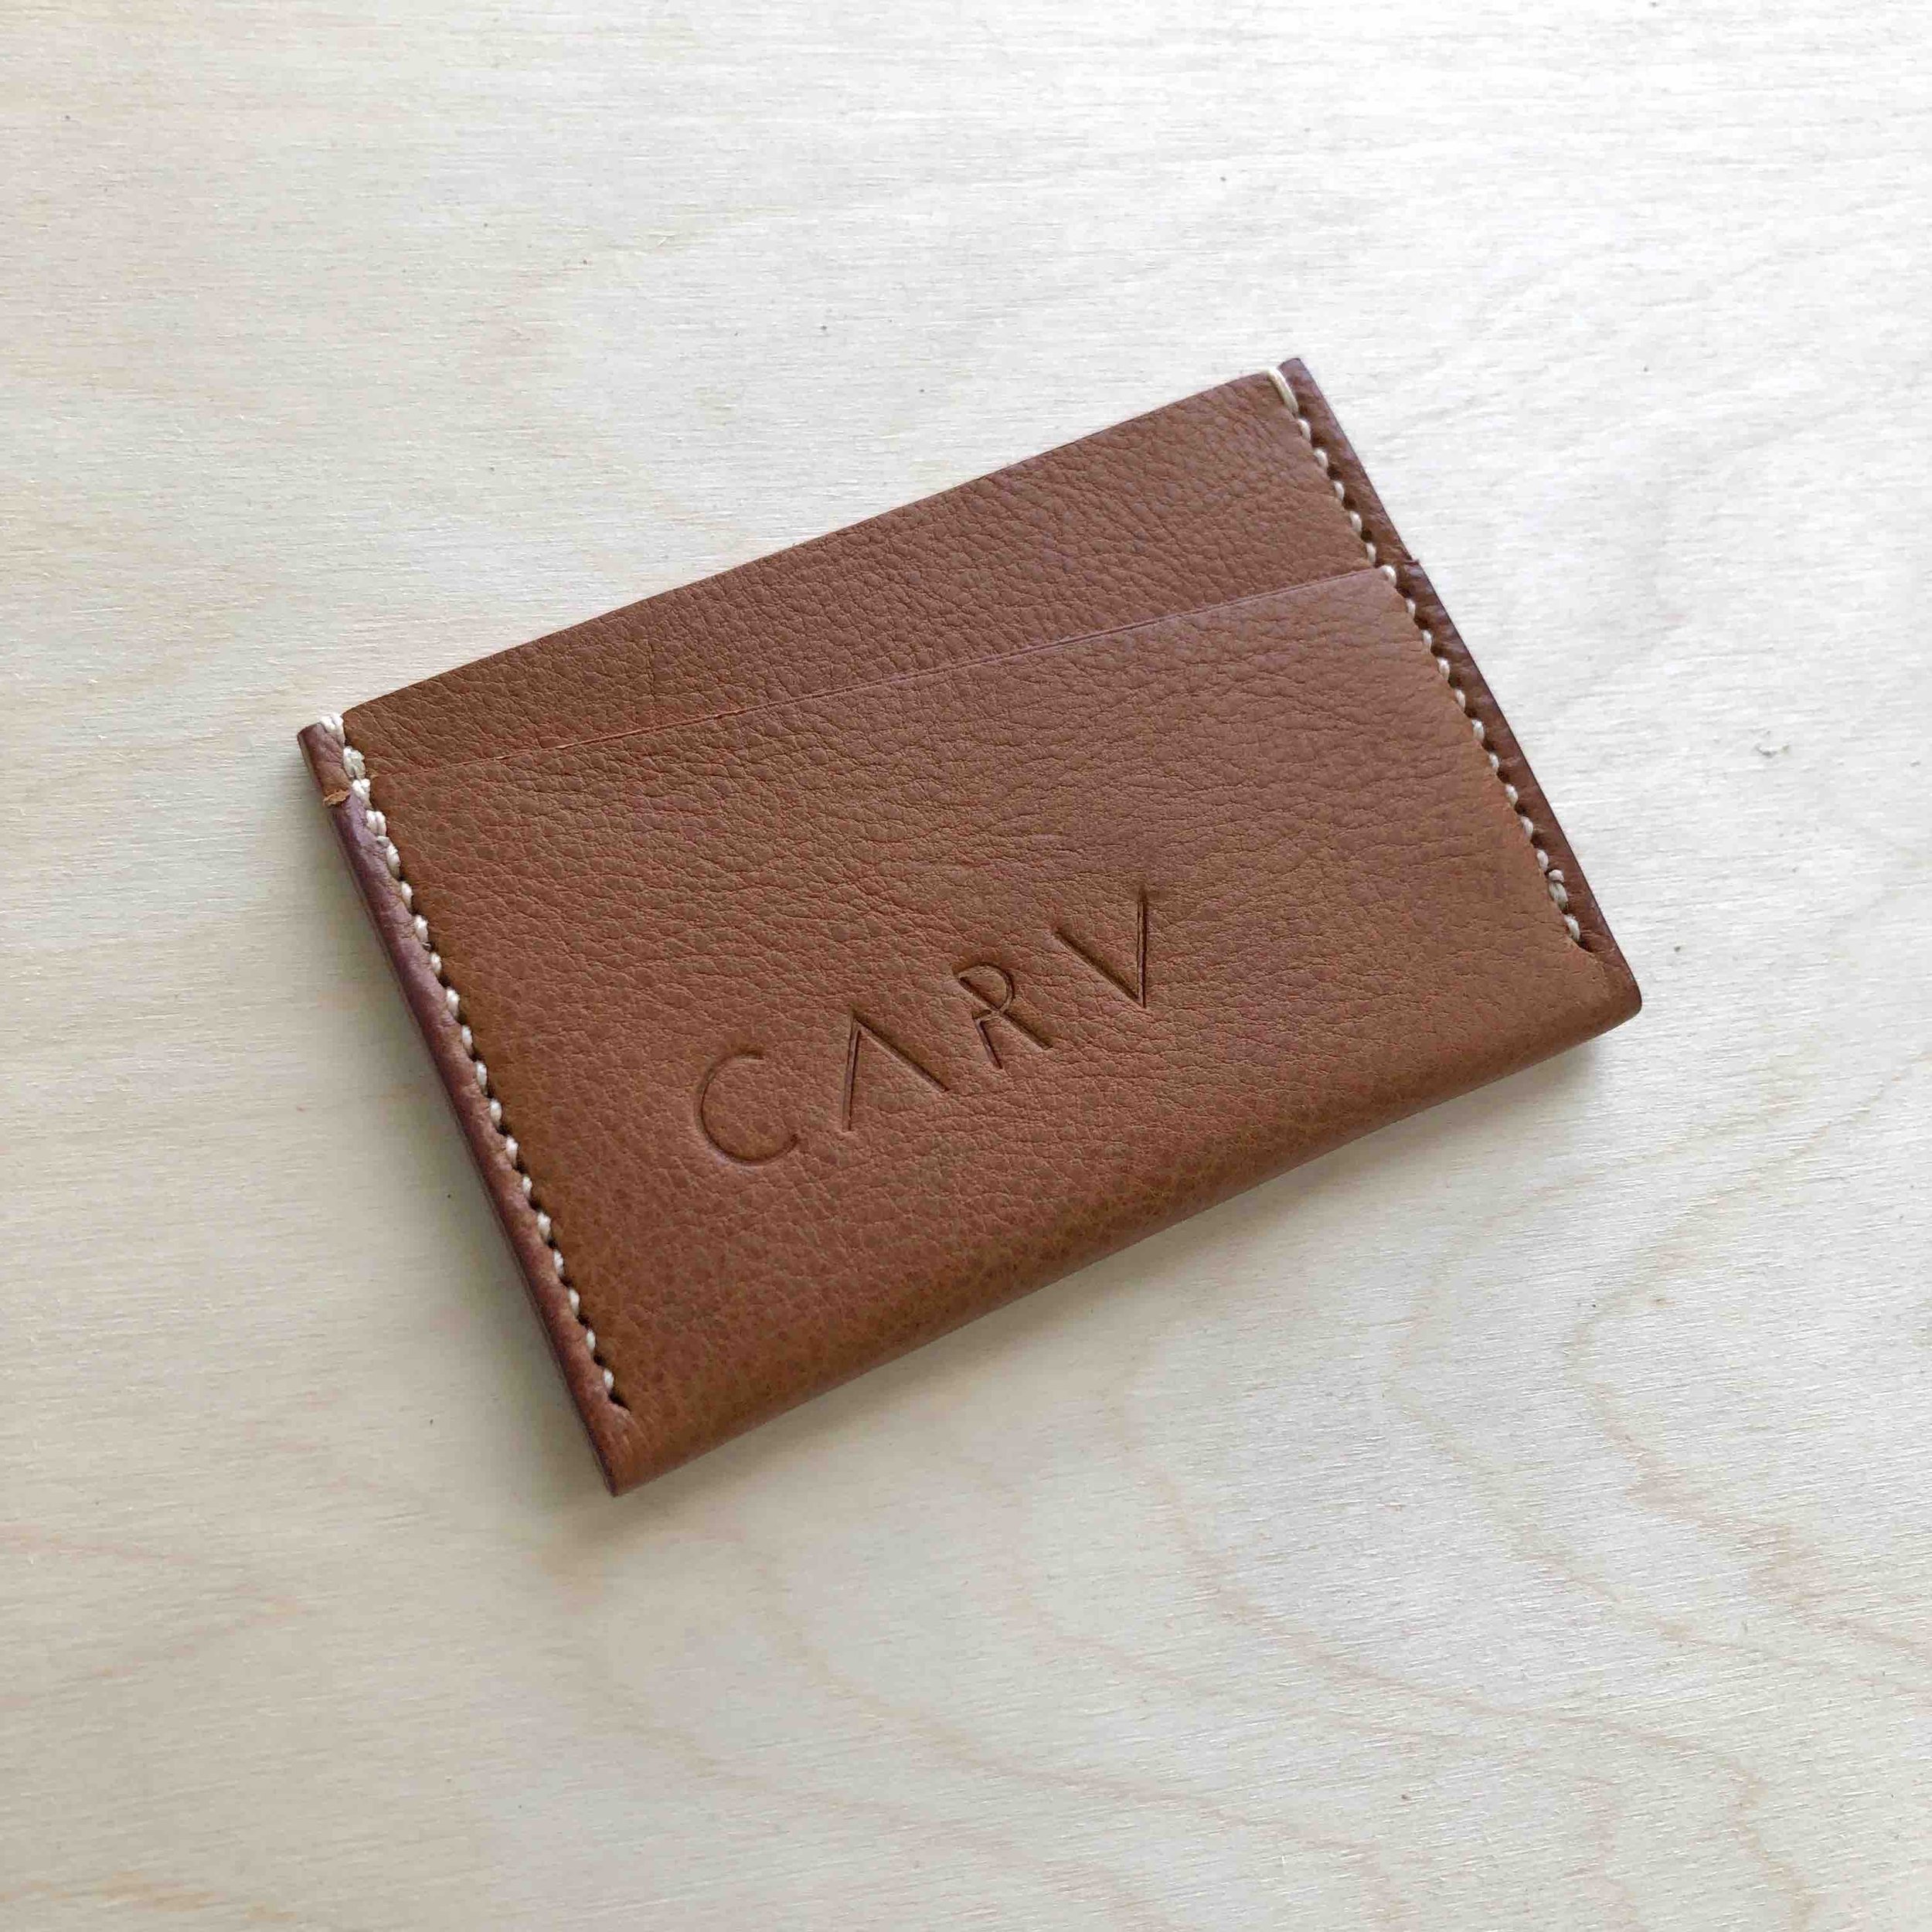 CARV sustainable leather card holder handmade in the UK.